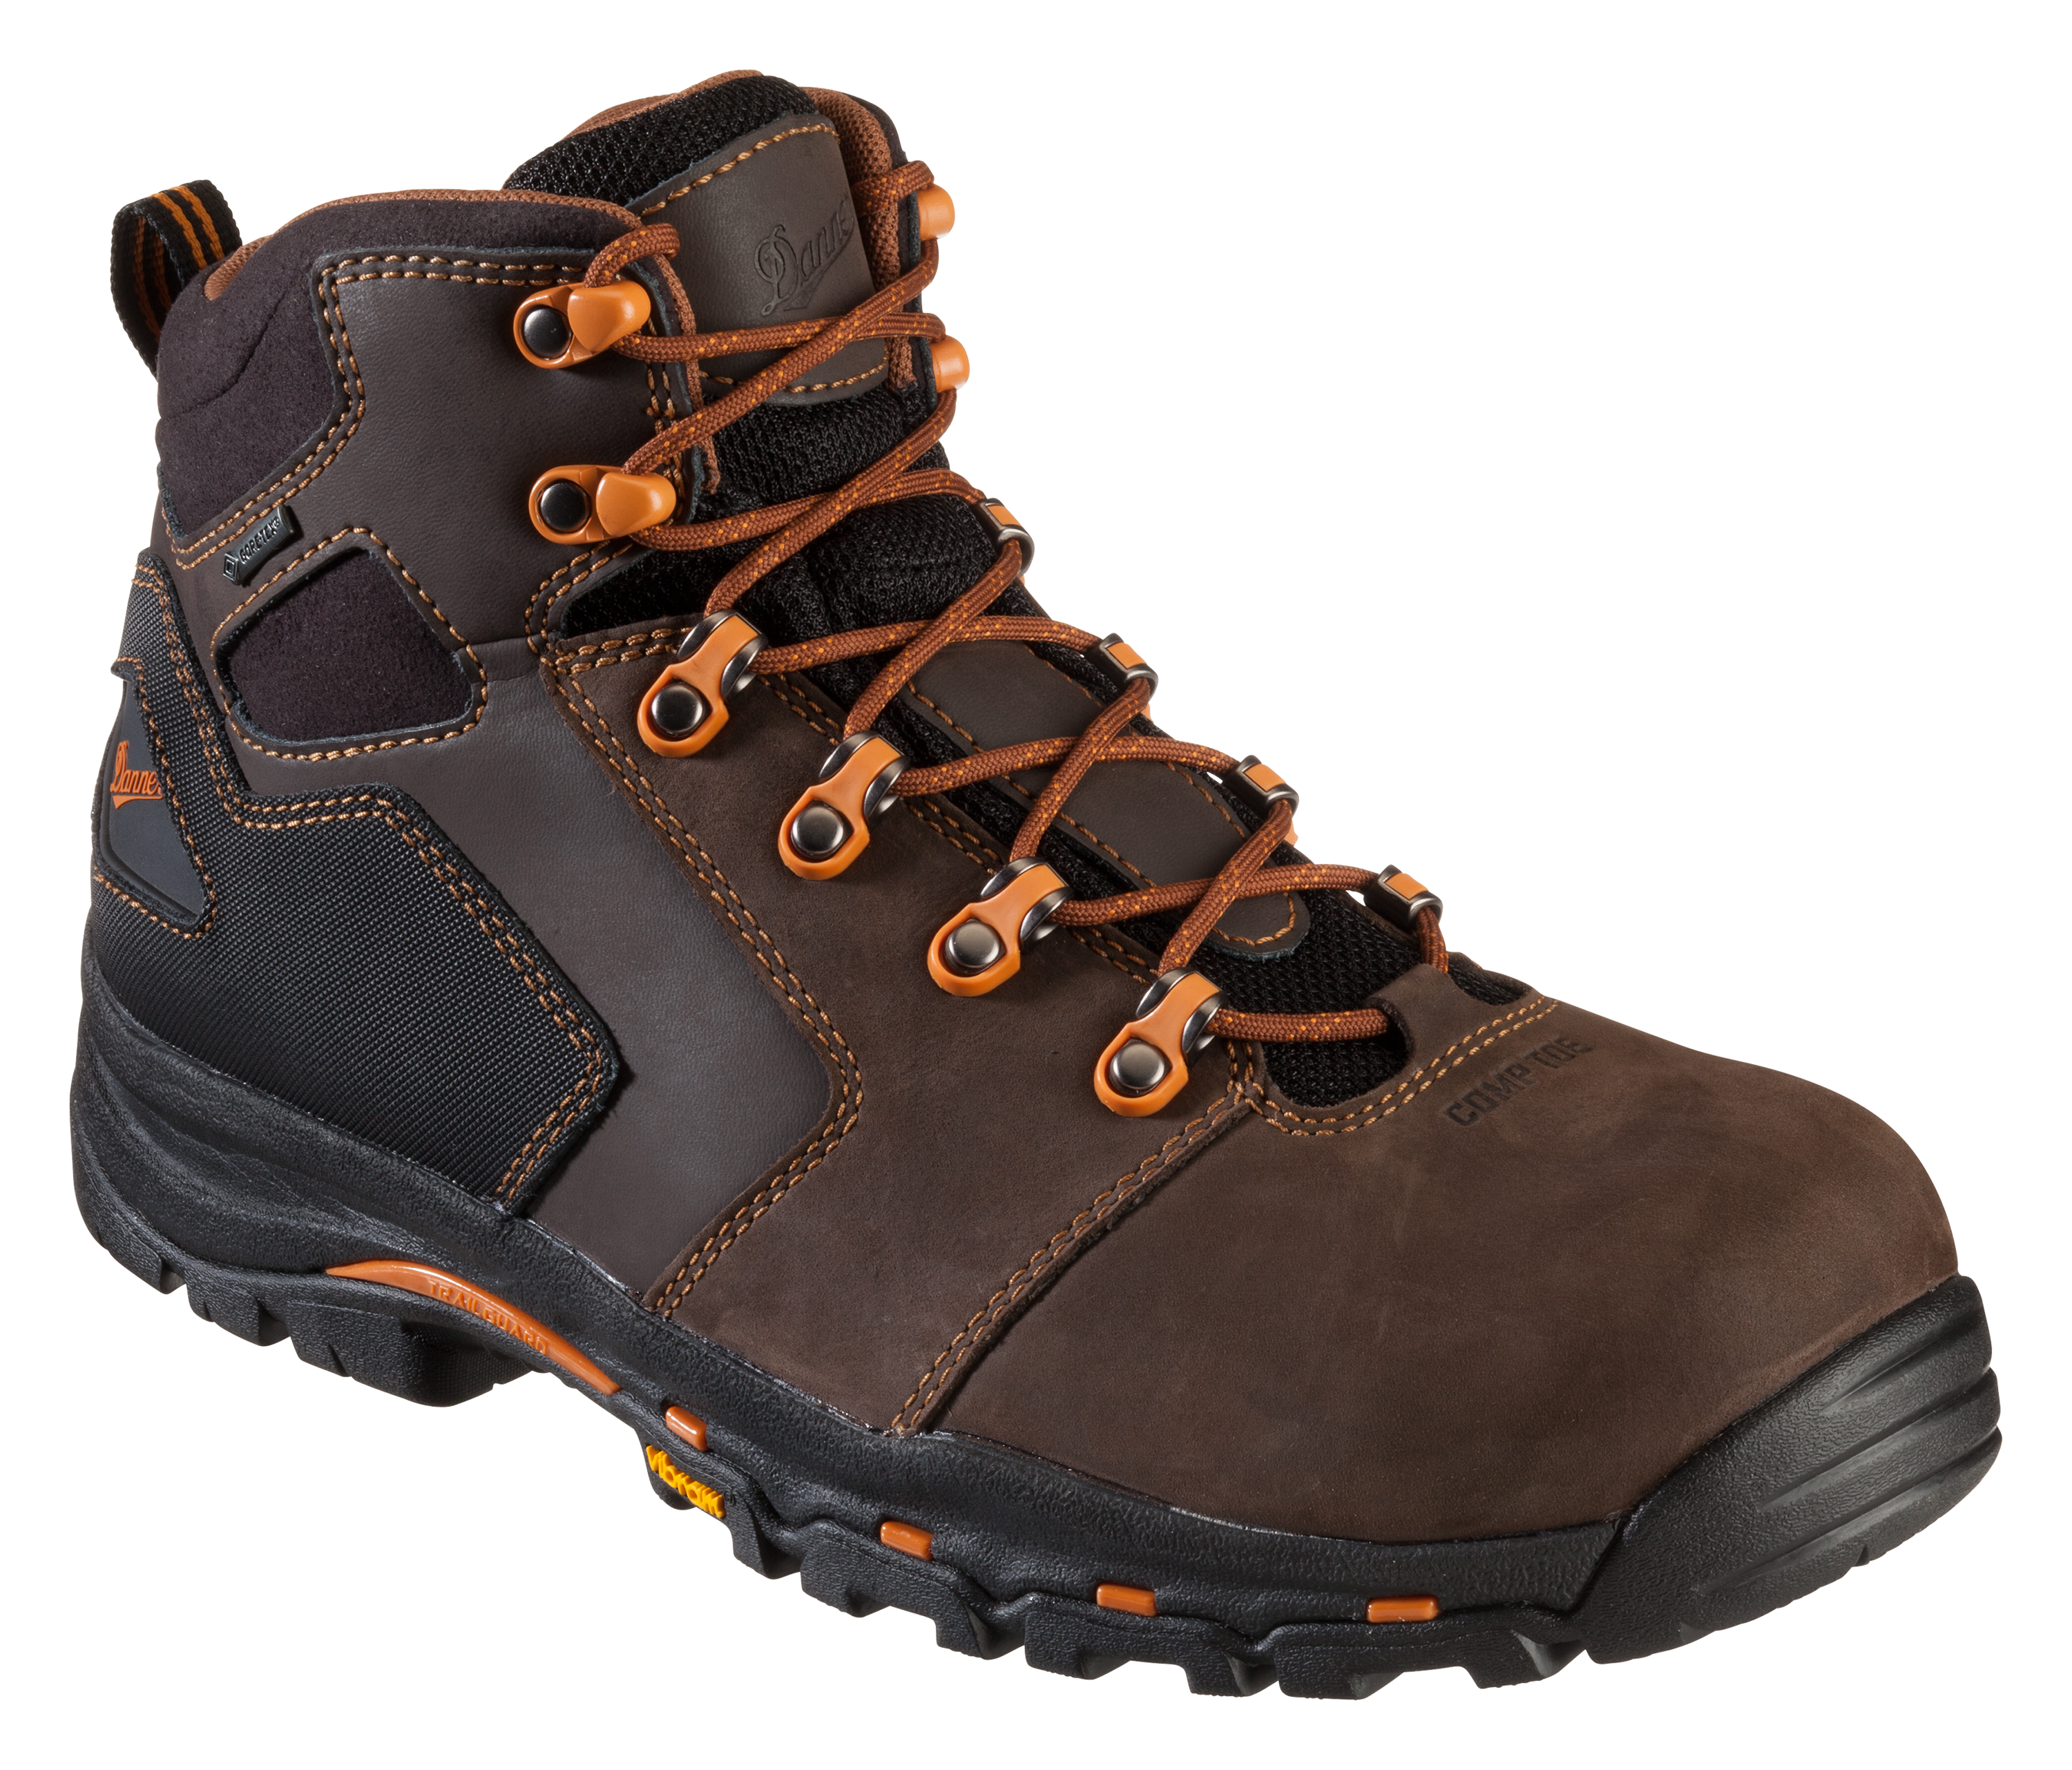 Danner Vicious GORE-TEX Non-Metallic Safety Toe Work Boots for Men - Brown - 8.5W